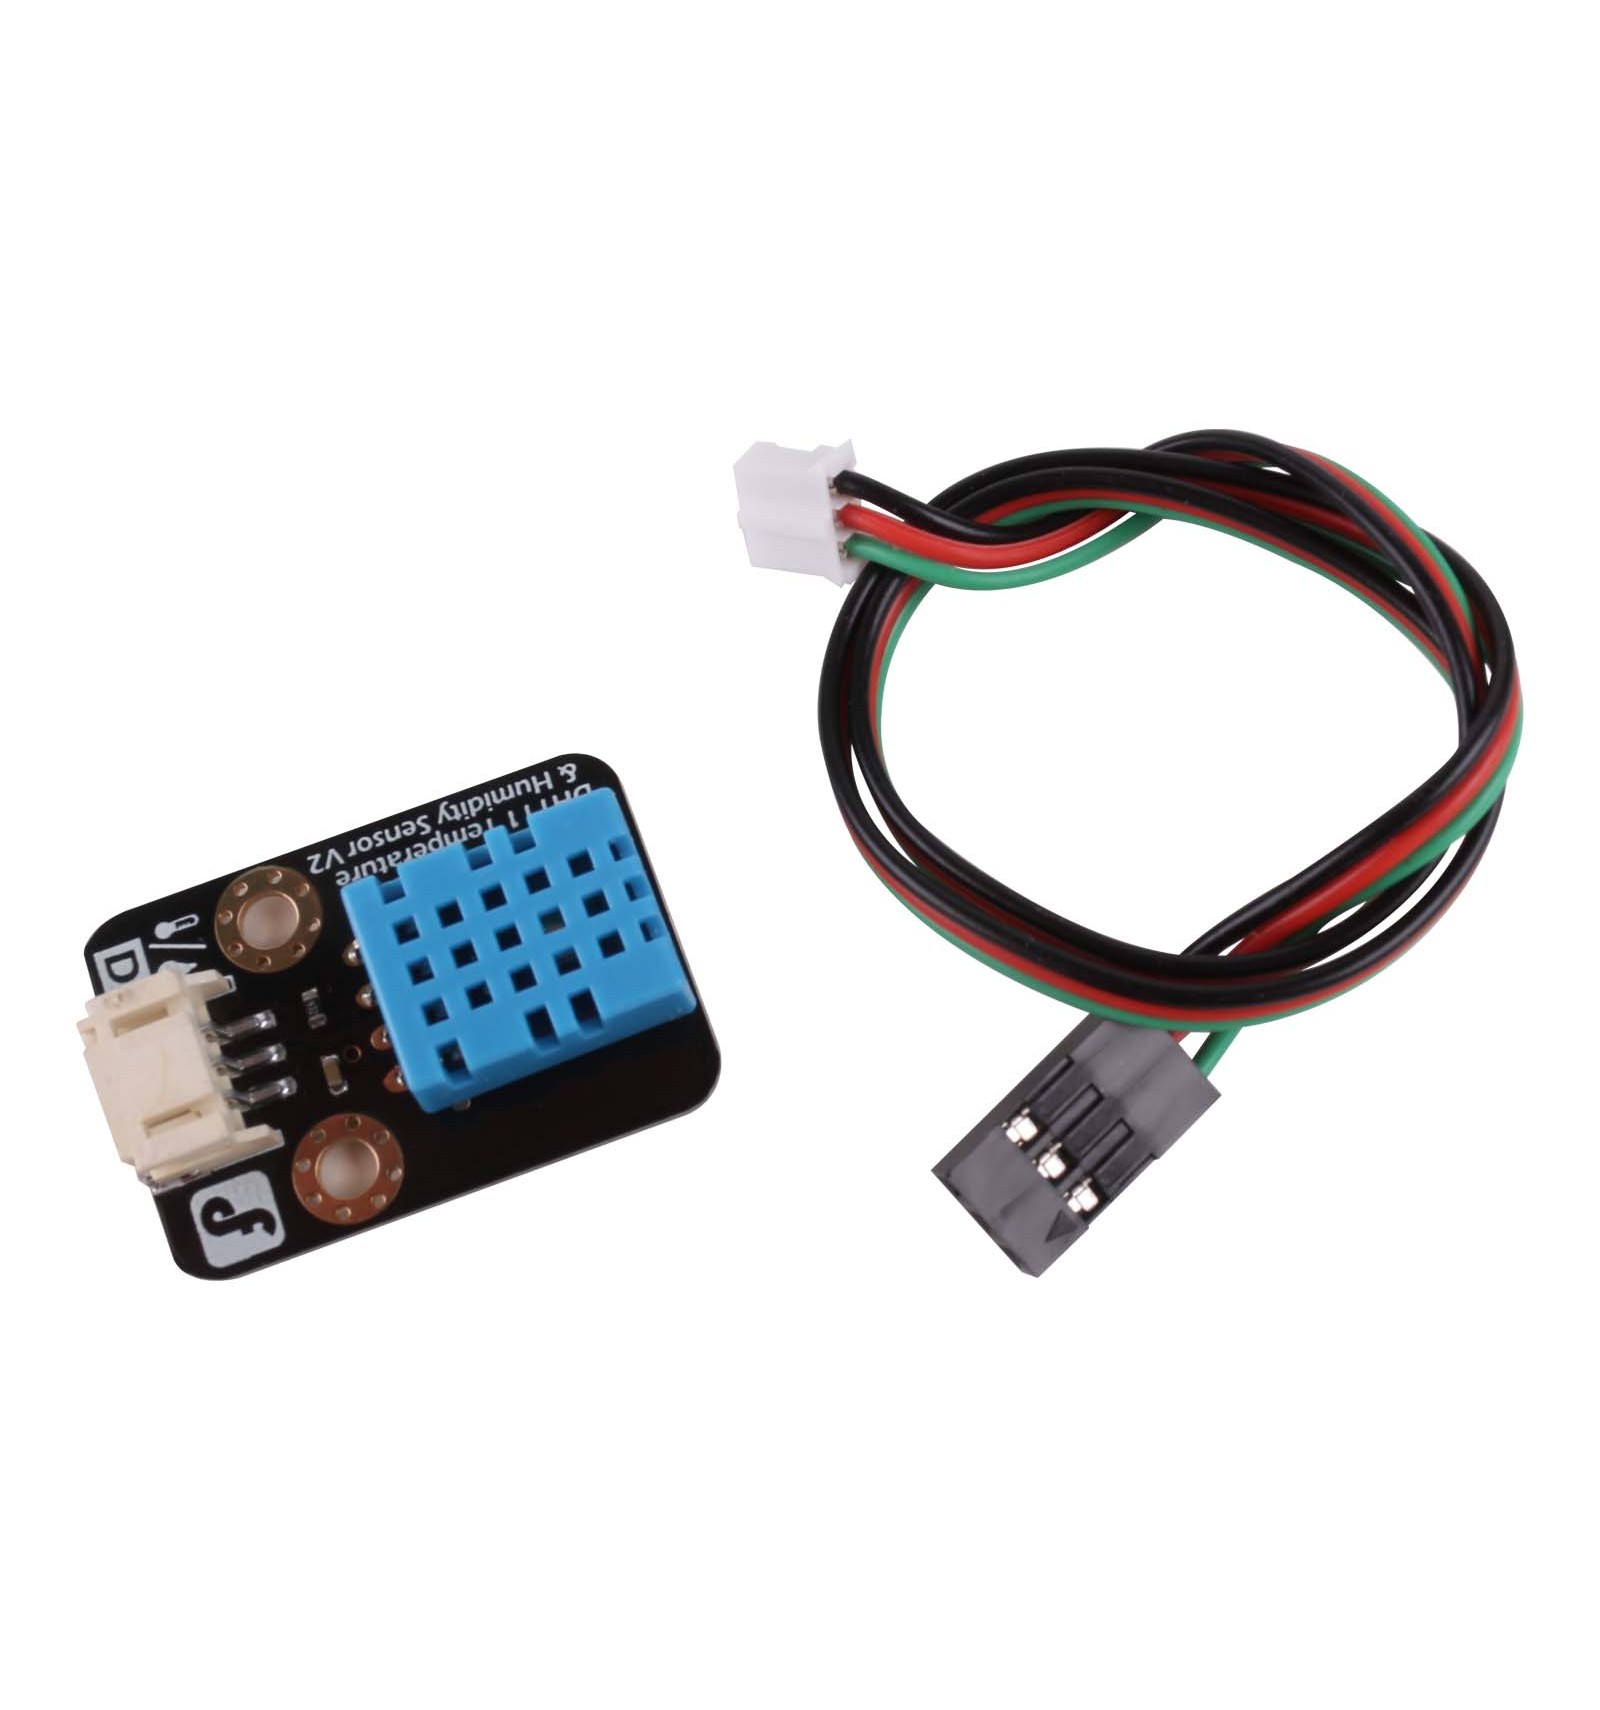 https://www.diyelectronics.co.za/store/14051-thickbox_default/dht11-v2-temperature-humidity-sensor-module-gravity-series.jpg